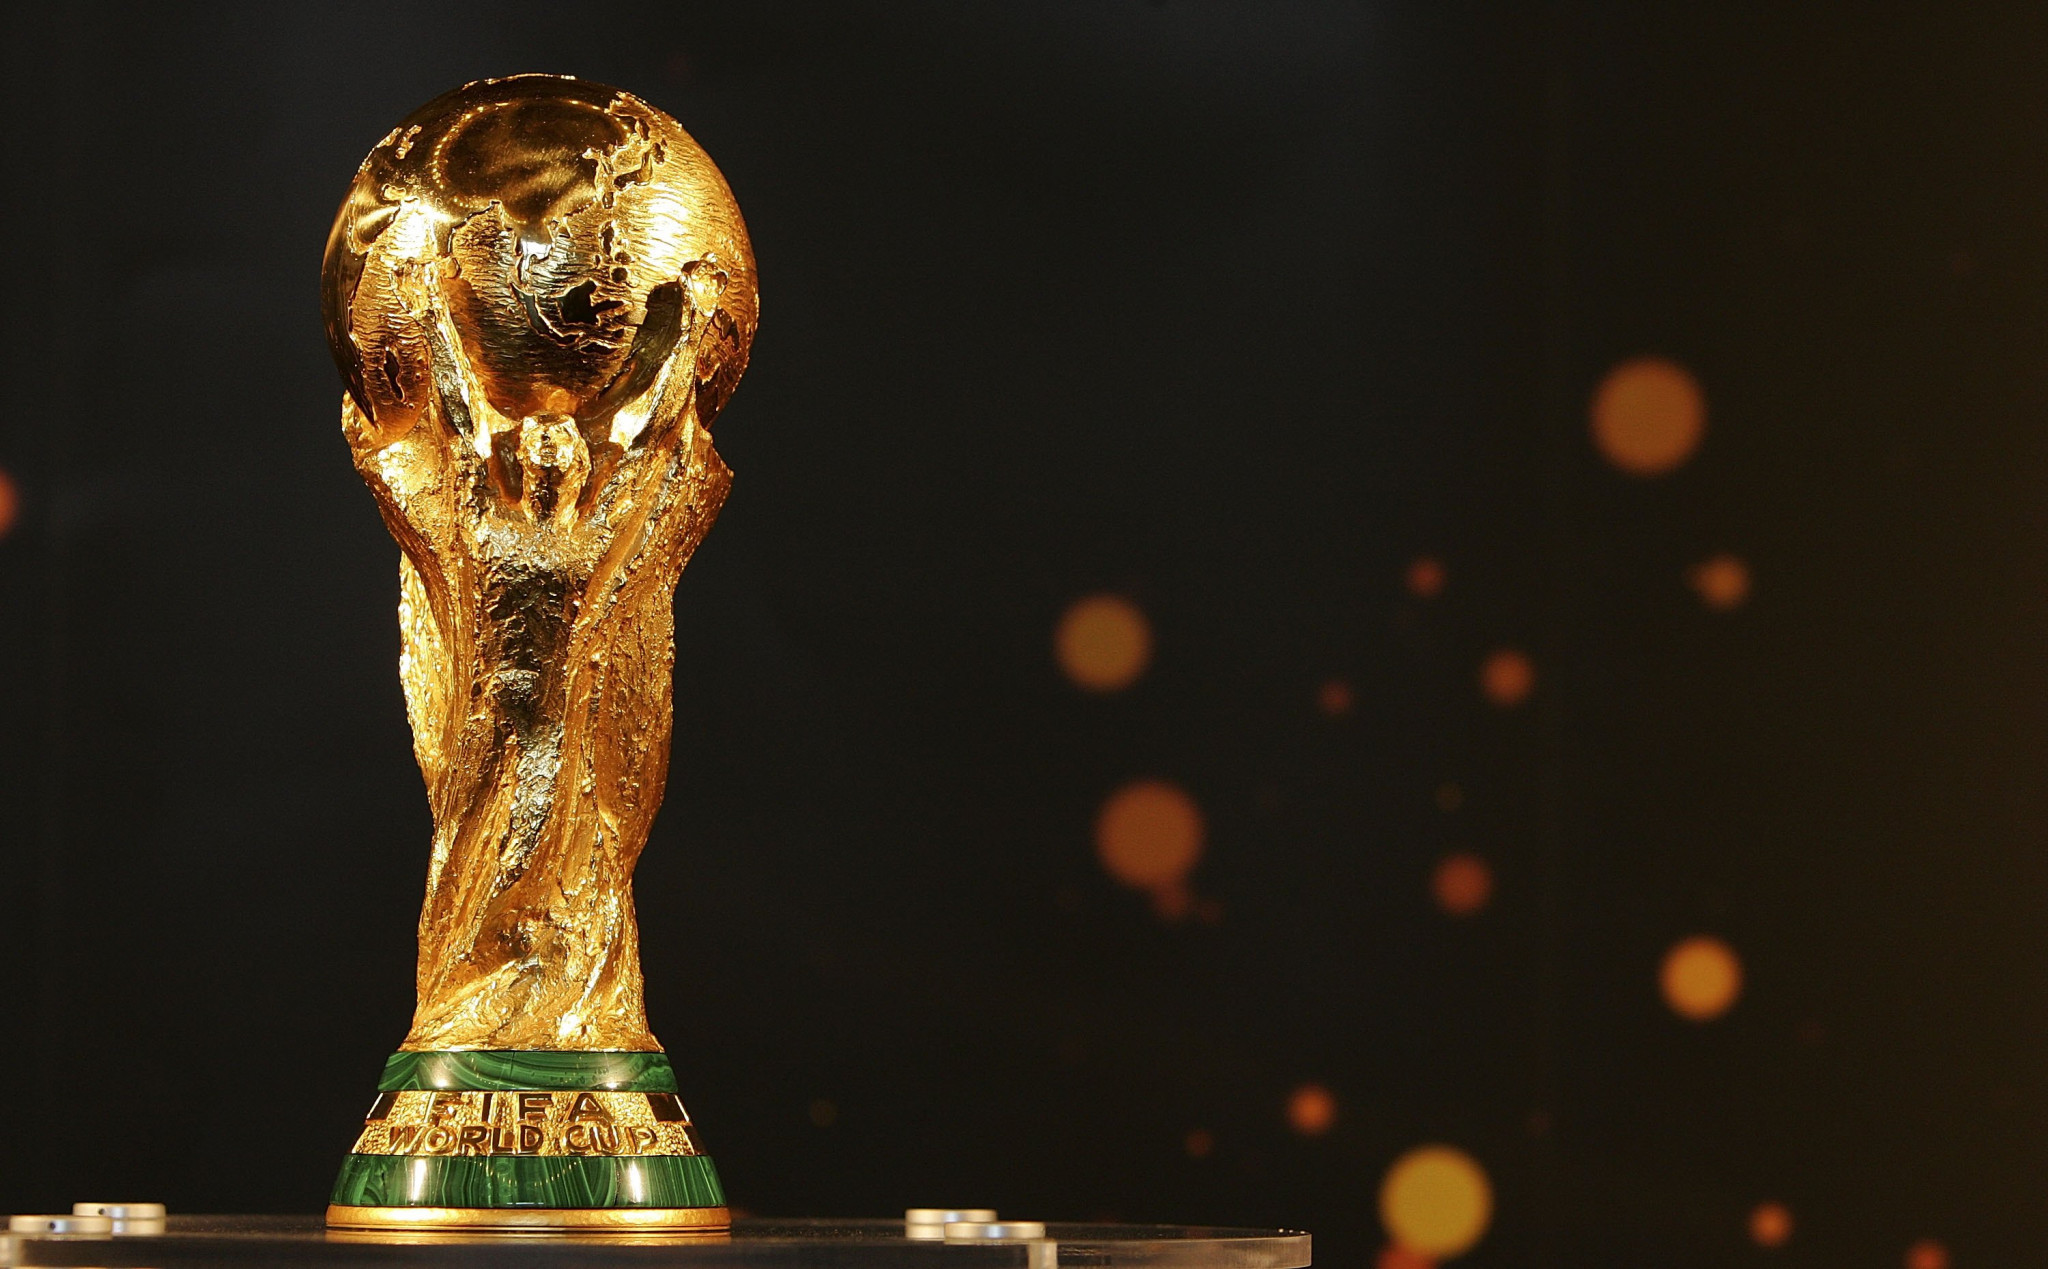 A UK and Ireland bid is being considered for the 2030 FIFA World Cup ©Getty Images